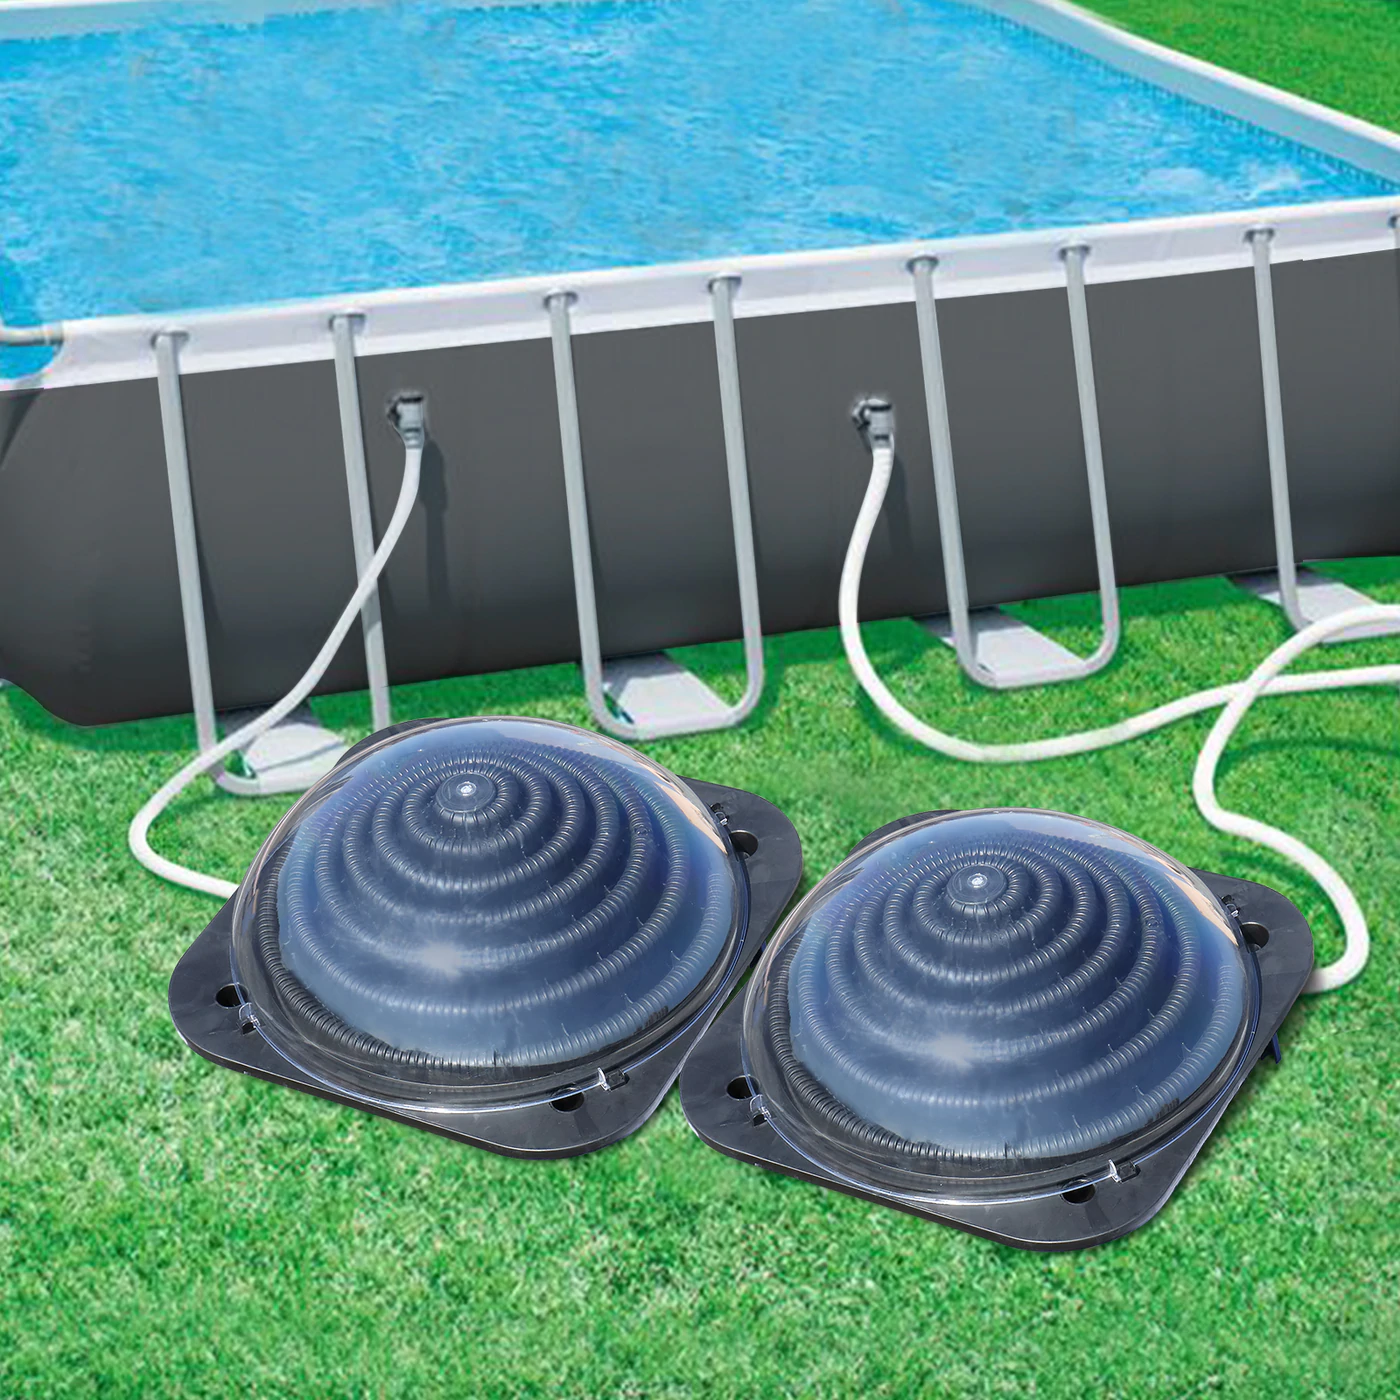 Upgrading your pool with a heater can help you maintain the perfect water temperature so you can use it all year long. Although we are fortunate to have mild weather for the bulk of the year in Australia, a heat pump can help you bridge the cold weather gap even further.